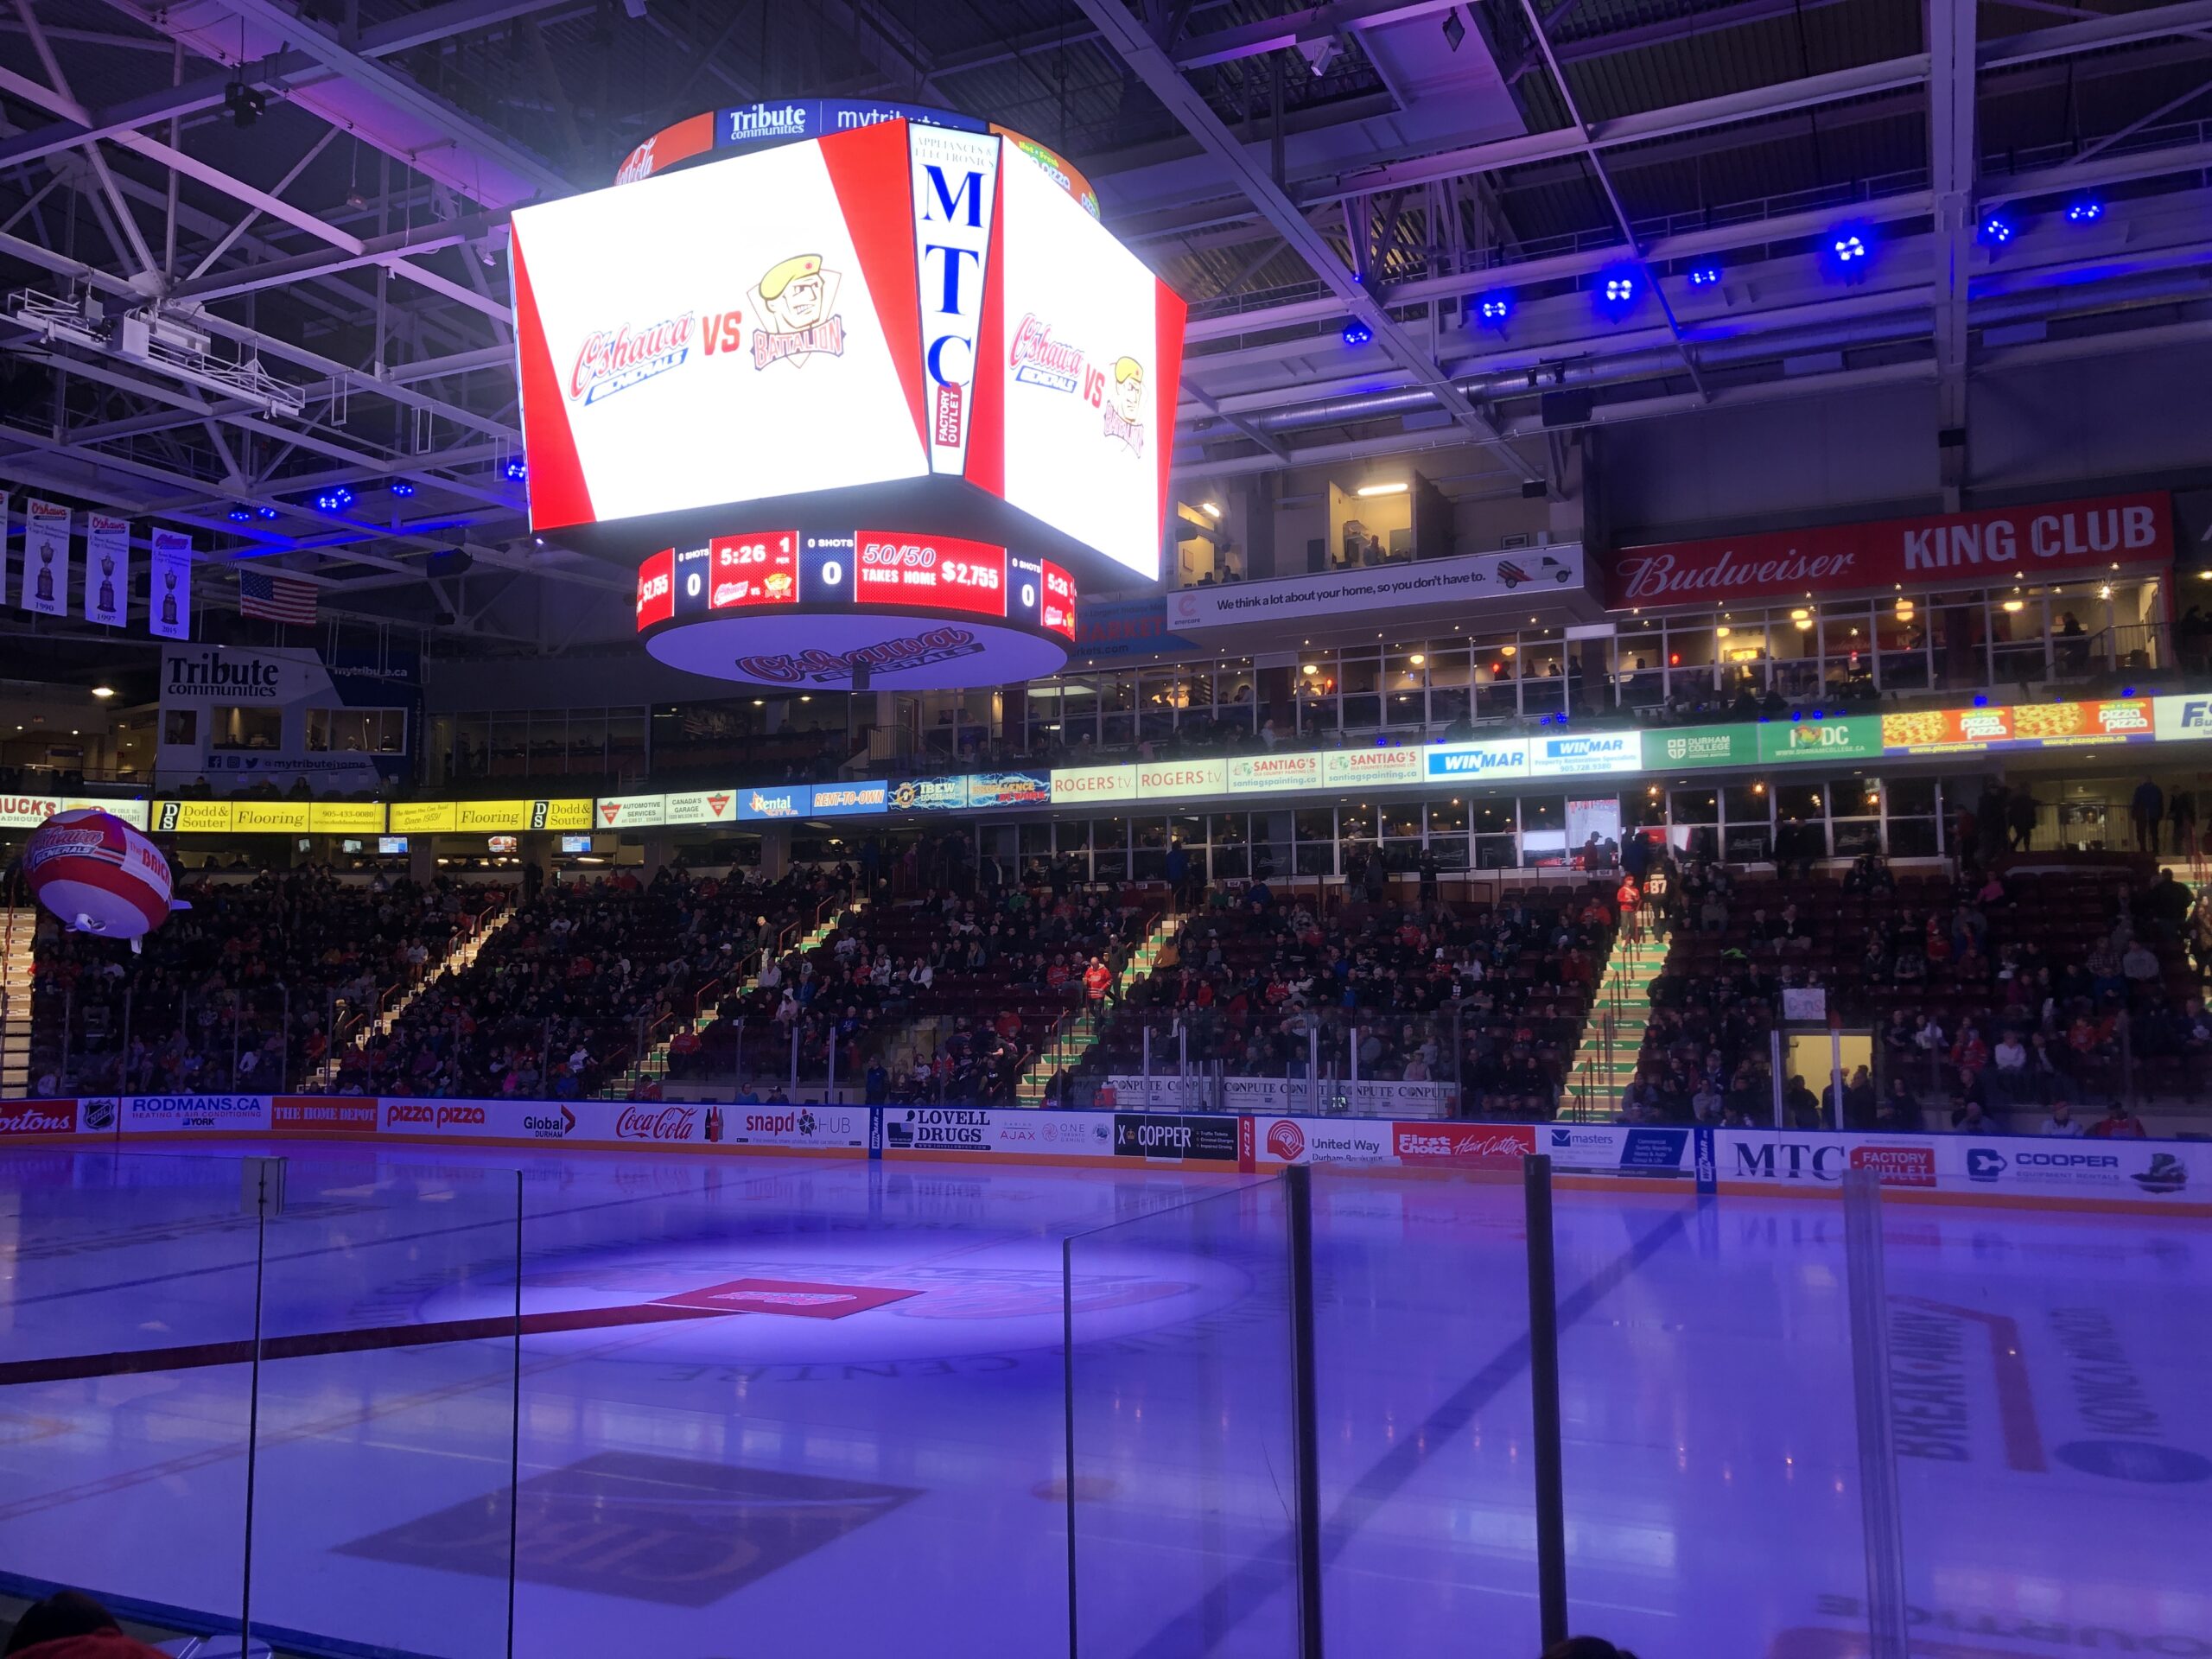 The interior of the TCC Arena as purple lights illuminate the rink. The crowd are getting to their seats, and the game will begin in five minutes after the photo was taken. The photo captures the opposite side of the rink from where it was taken.